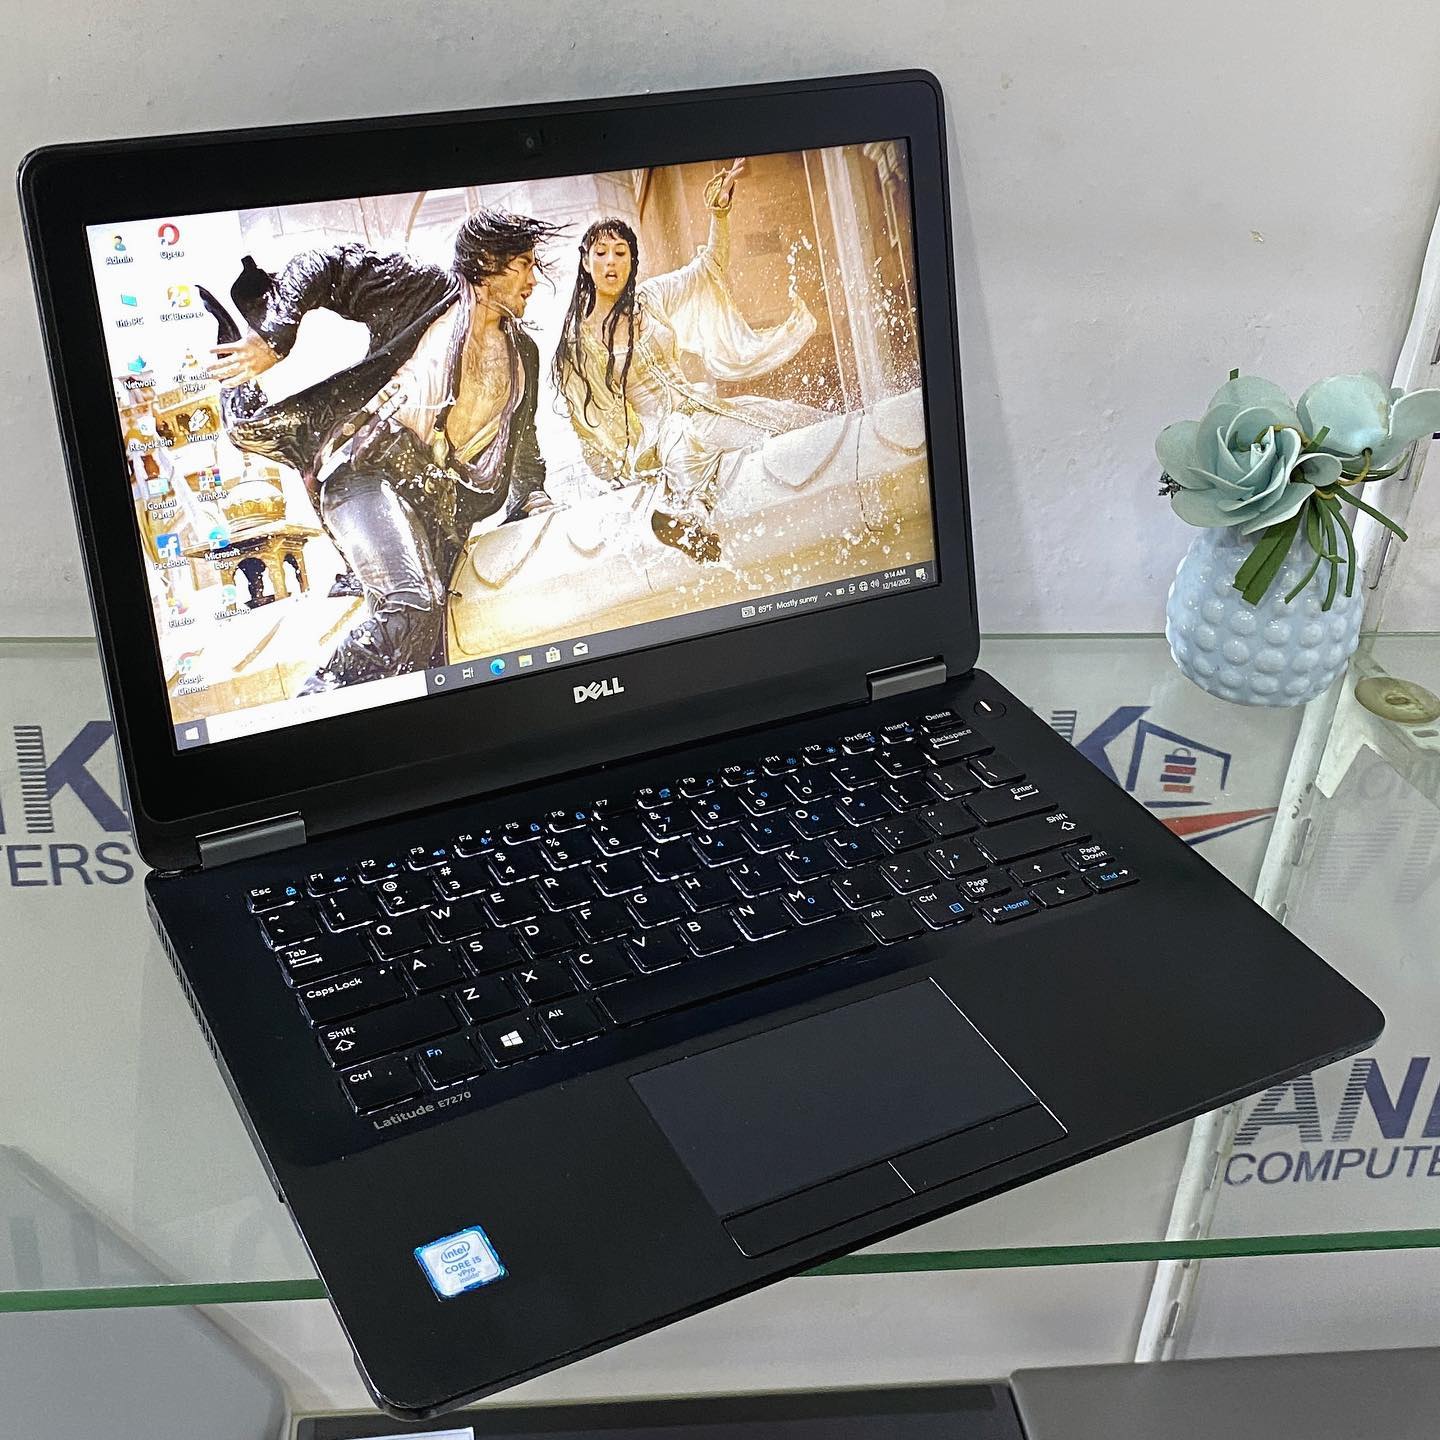 hænge tro Anoi Dell Latitude E7270 Ultrabook PC - Gaming/Graphics - C0RE i5 - 128GB SSD -  16GB Ram | aniklimited